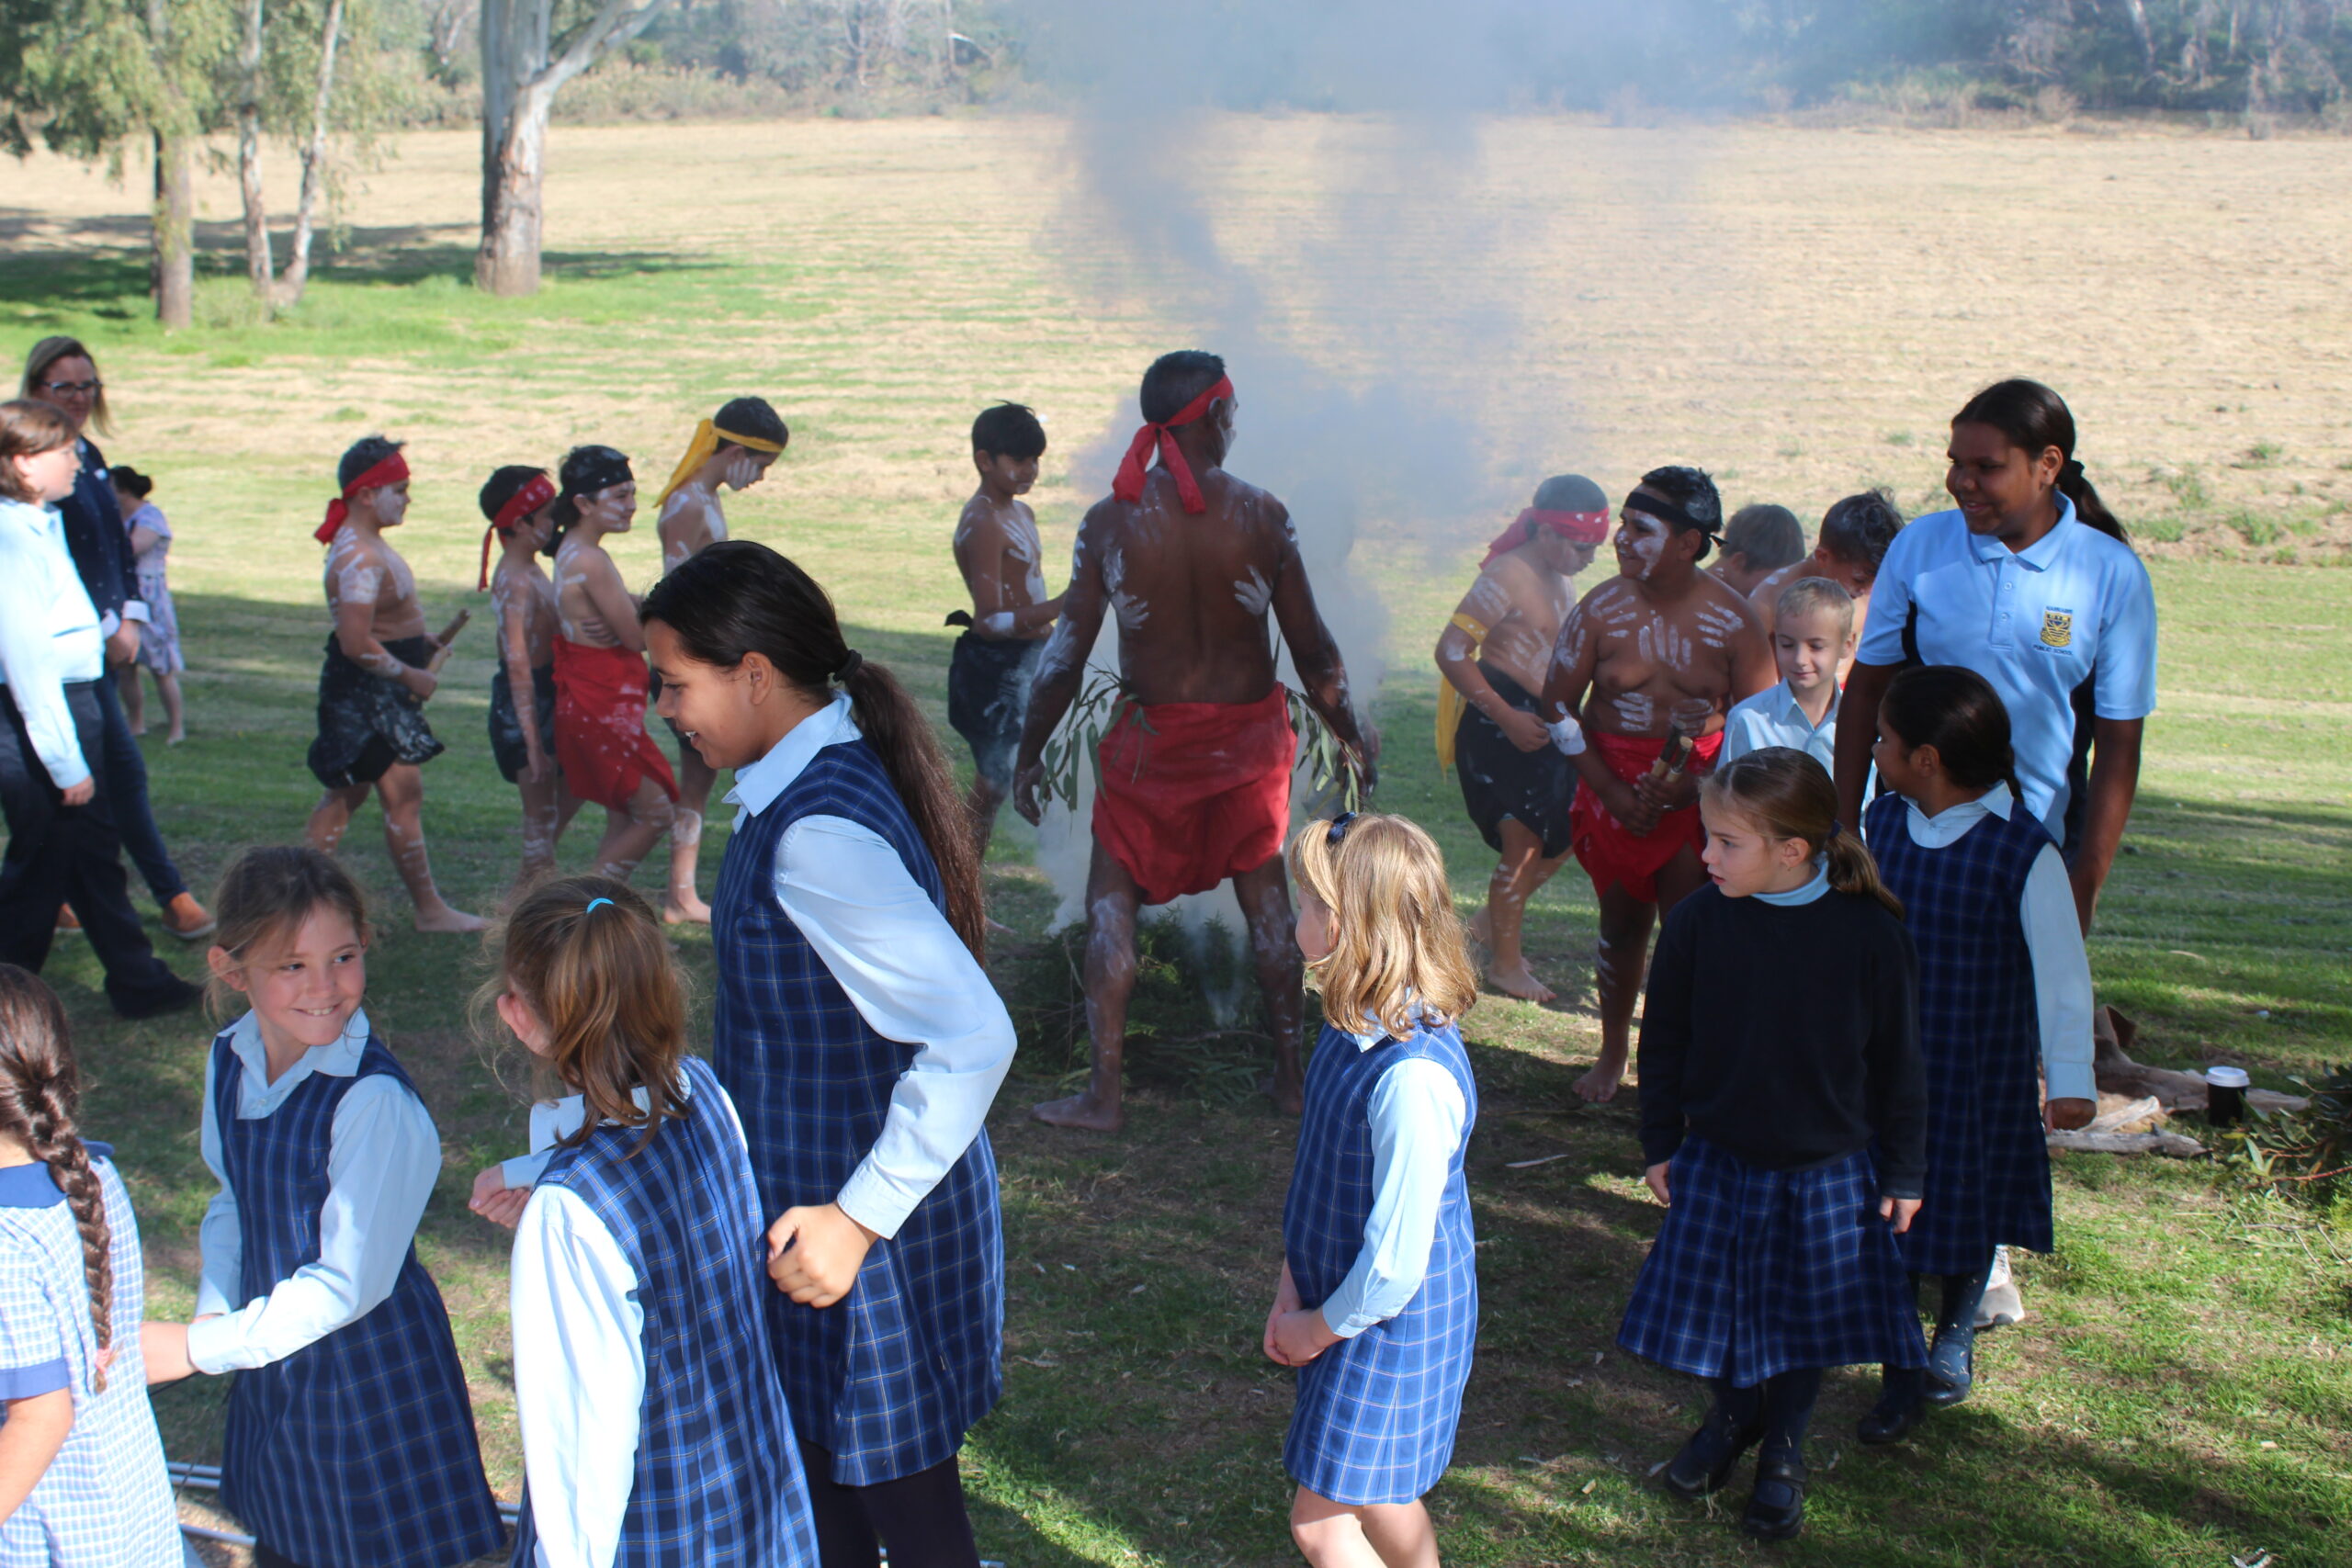 Attendees walking around the fire and through the smoke during the ceremony.